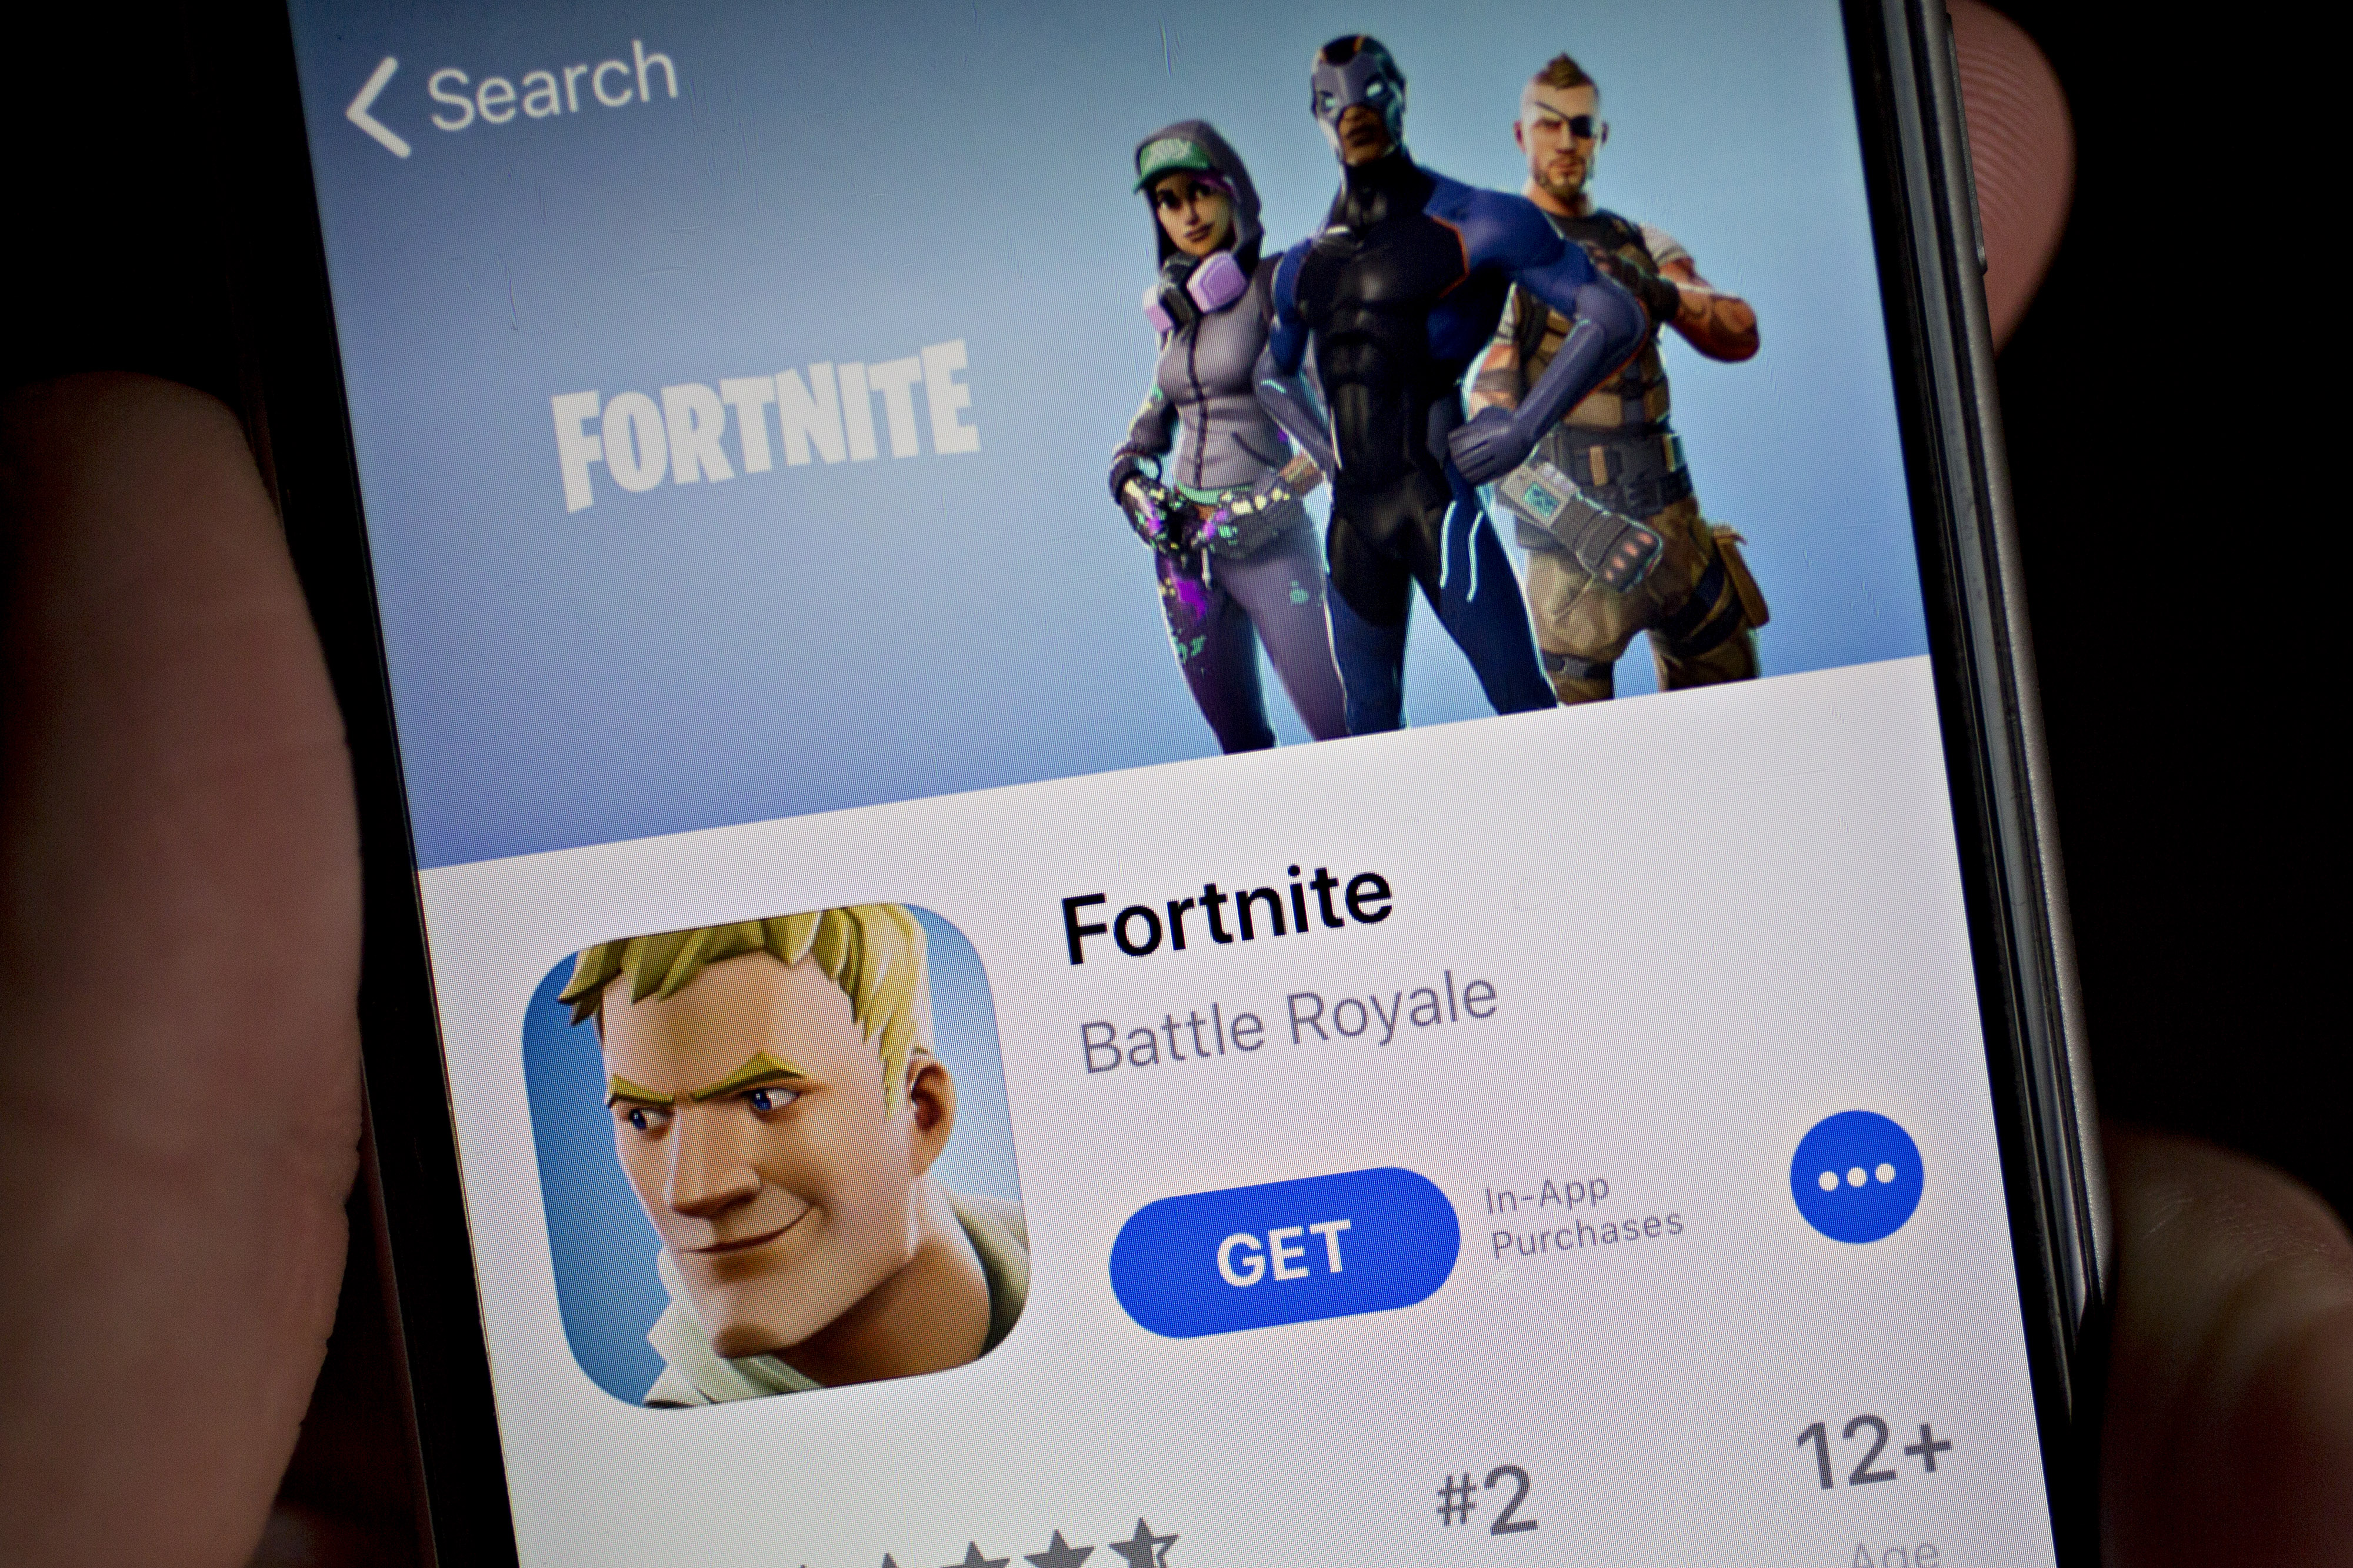 Fortnite Google Search Epic Files Suit Against Apple After Fortnite Pulled From Ios App Store Updated Ars Technica